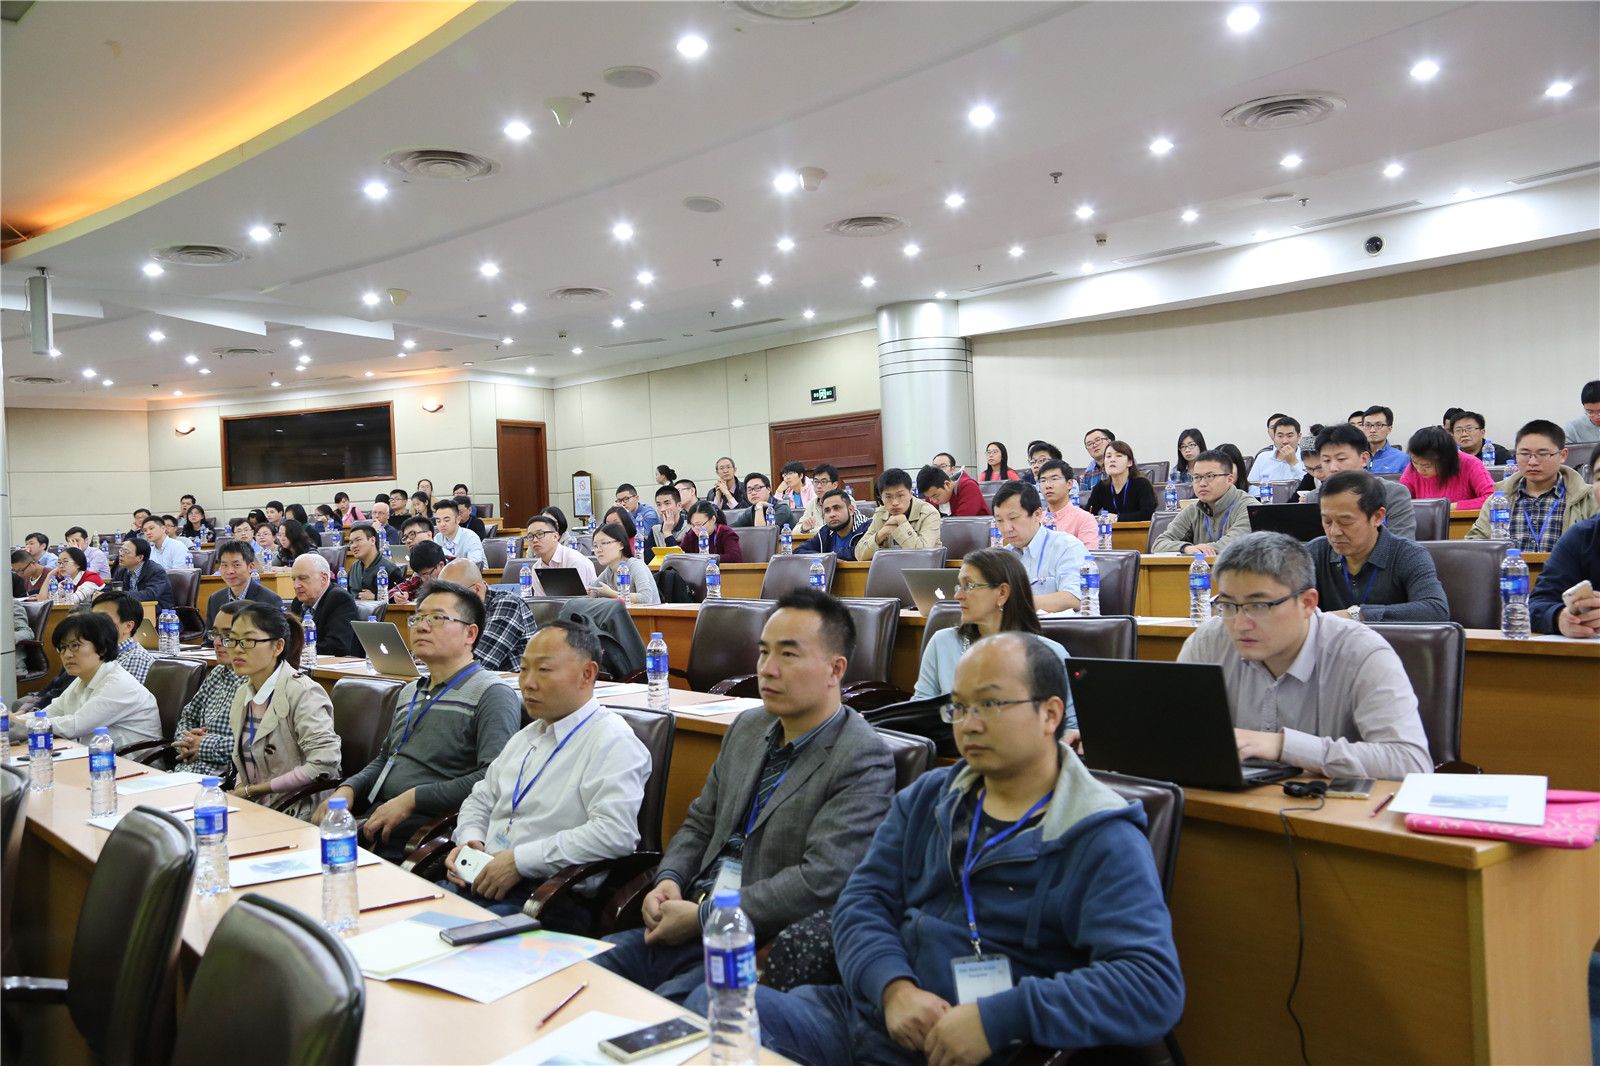 The 20th IMACS WORLD CONGRESS took place in Xiamen